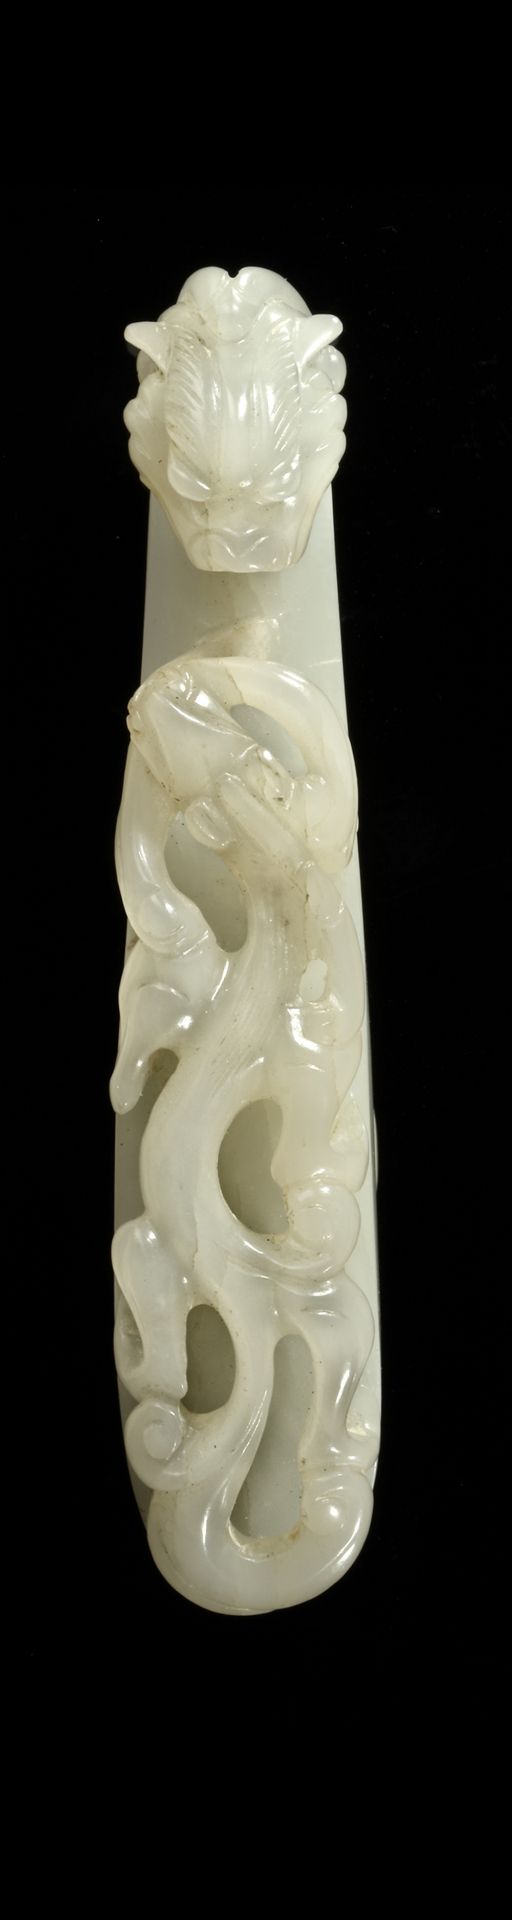 A CHINESE JADE BELT HOOK, 19TH-20TH CENTURY - Image 3 of 6